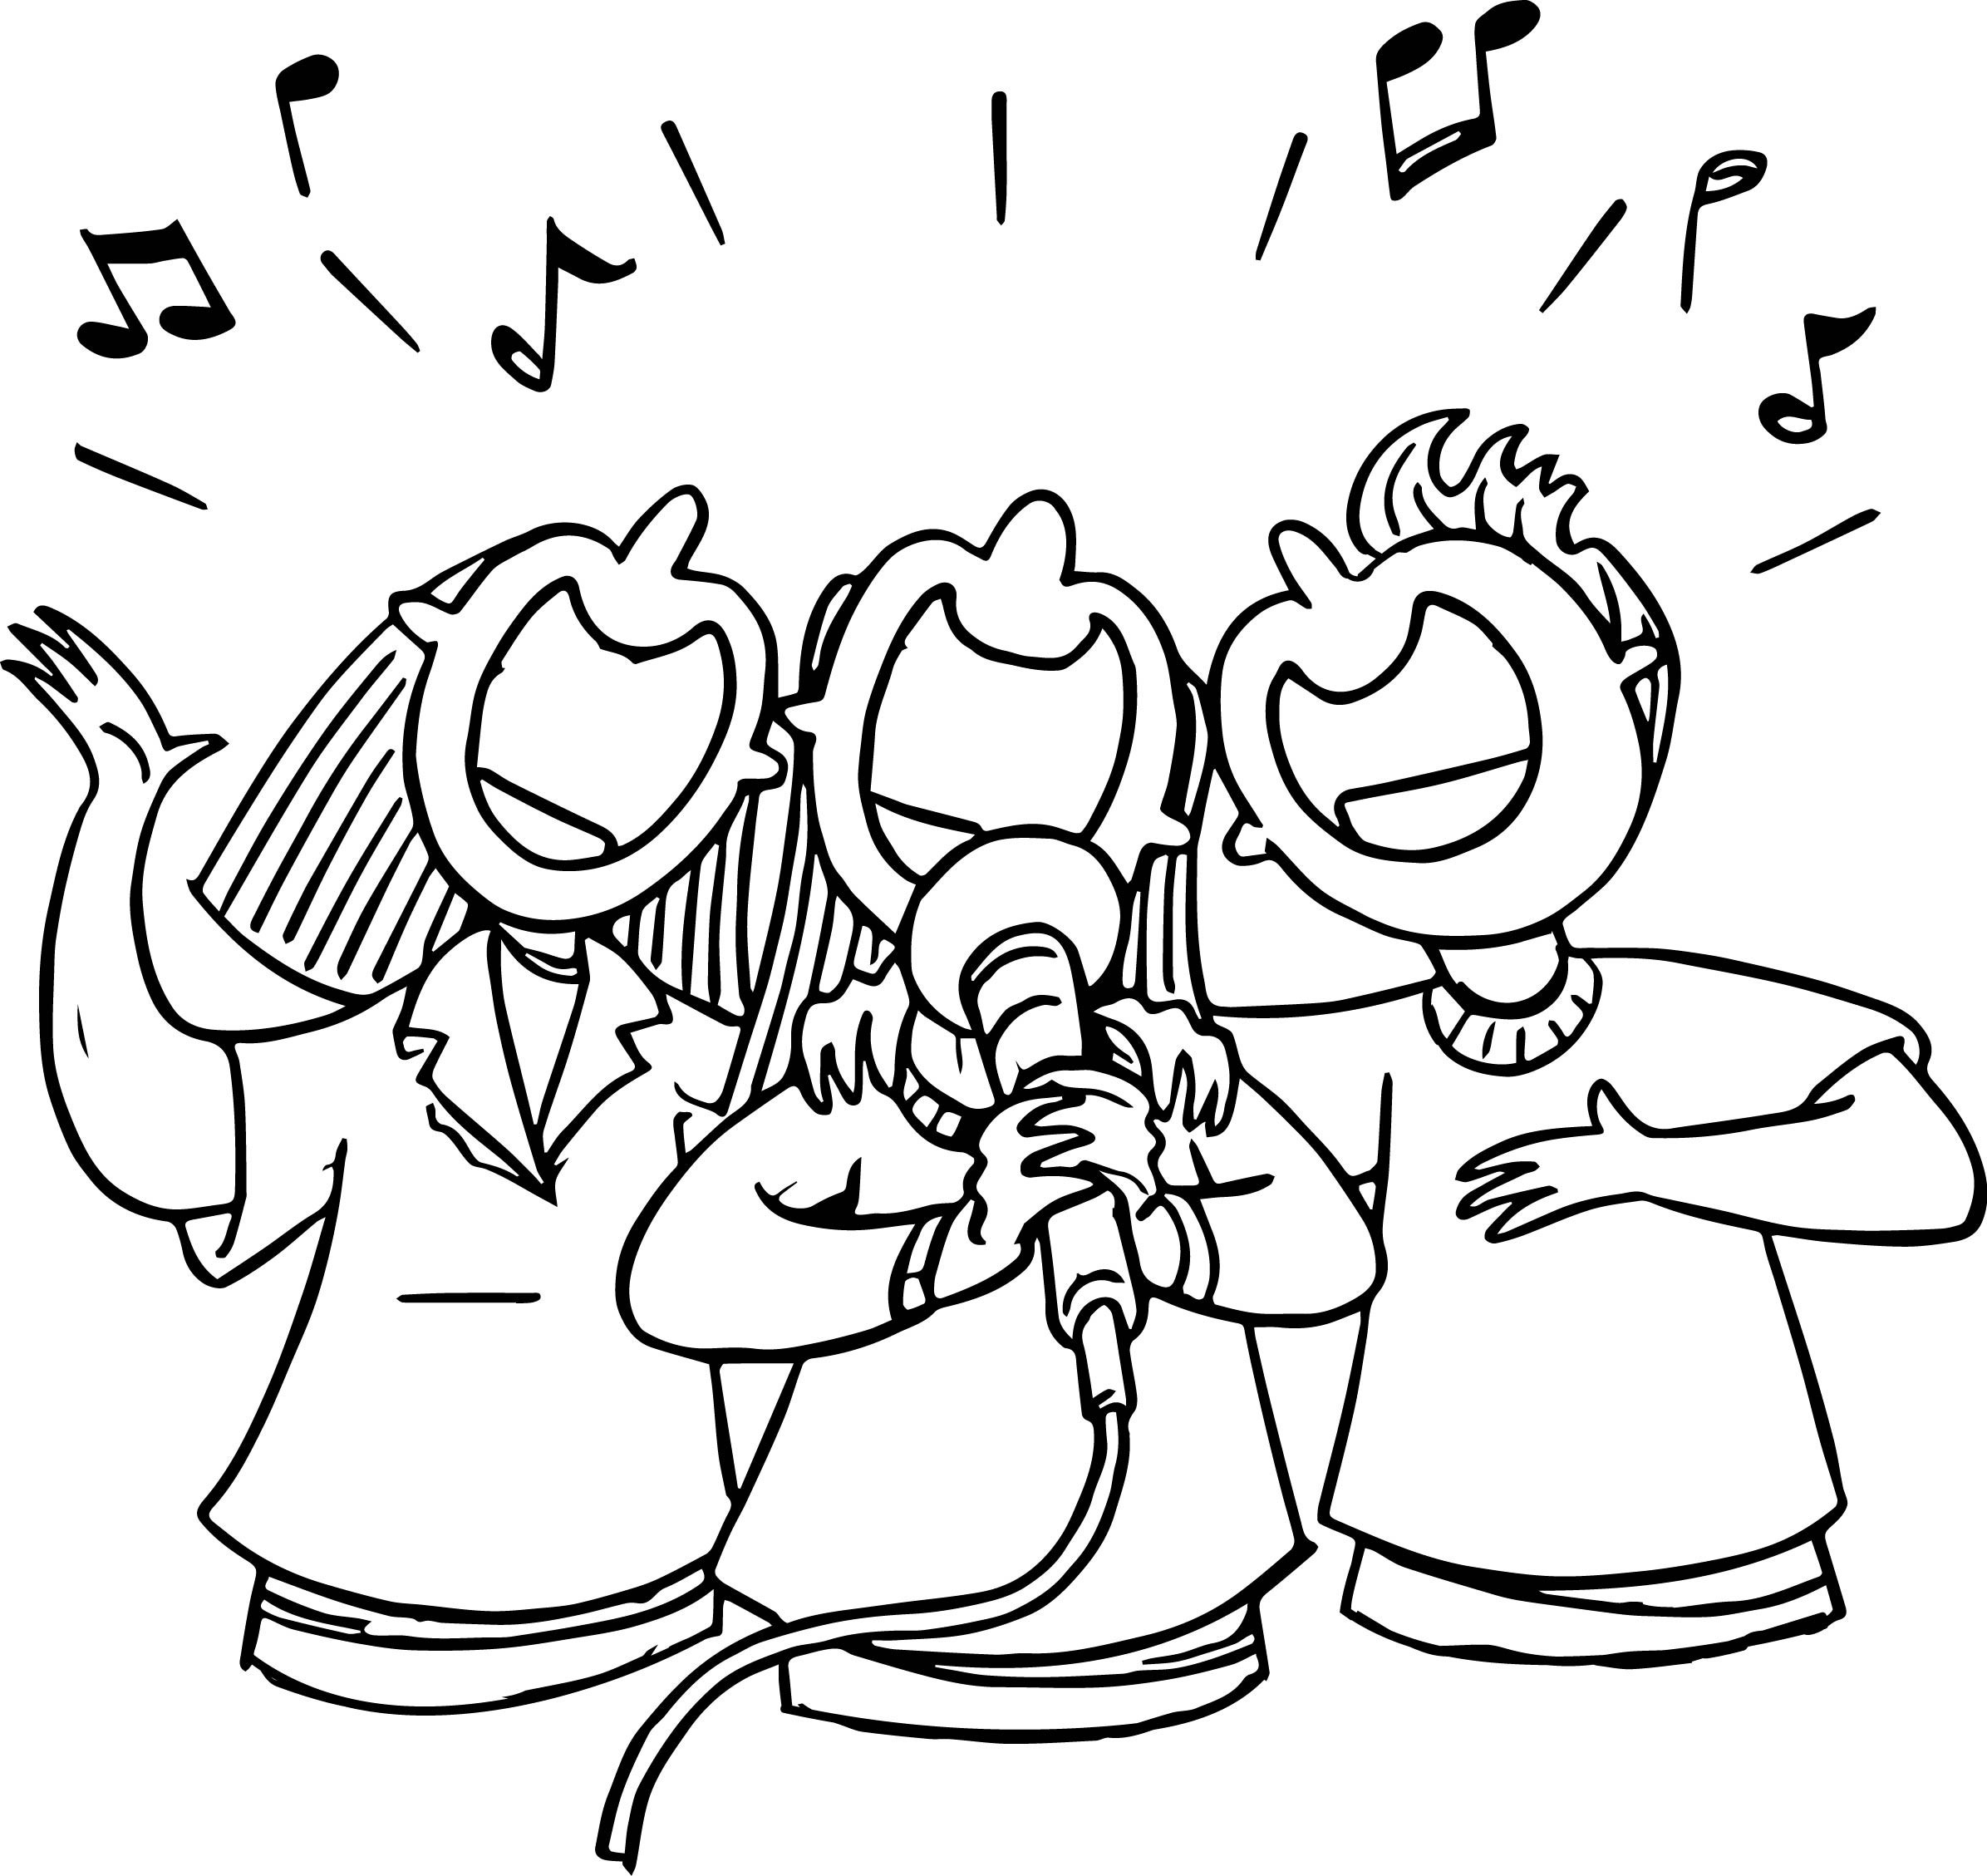 Children Singing Coloring Page at GetColorings.com | Free printable